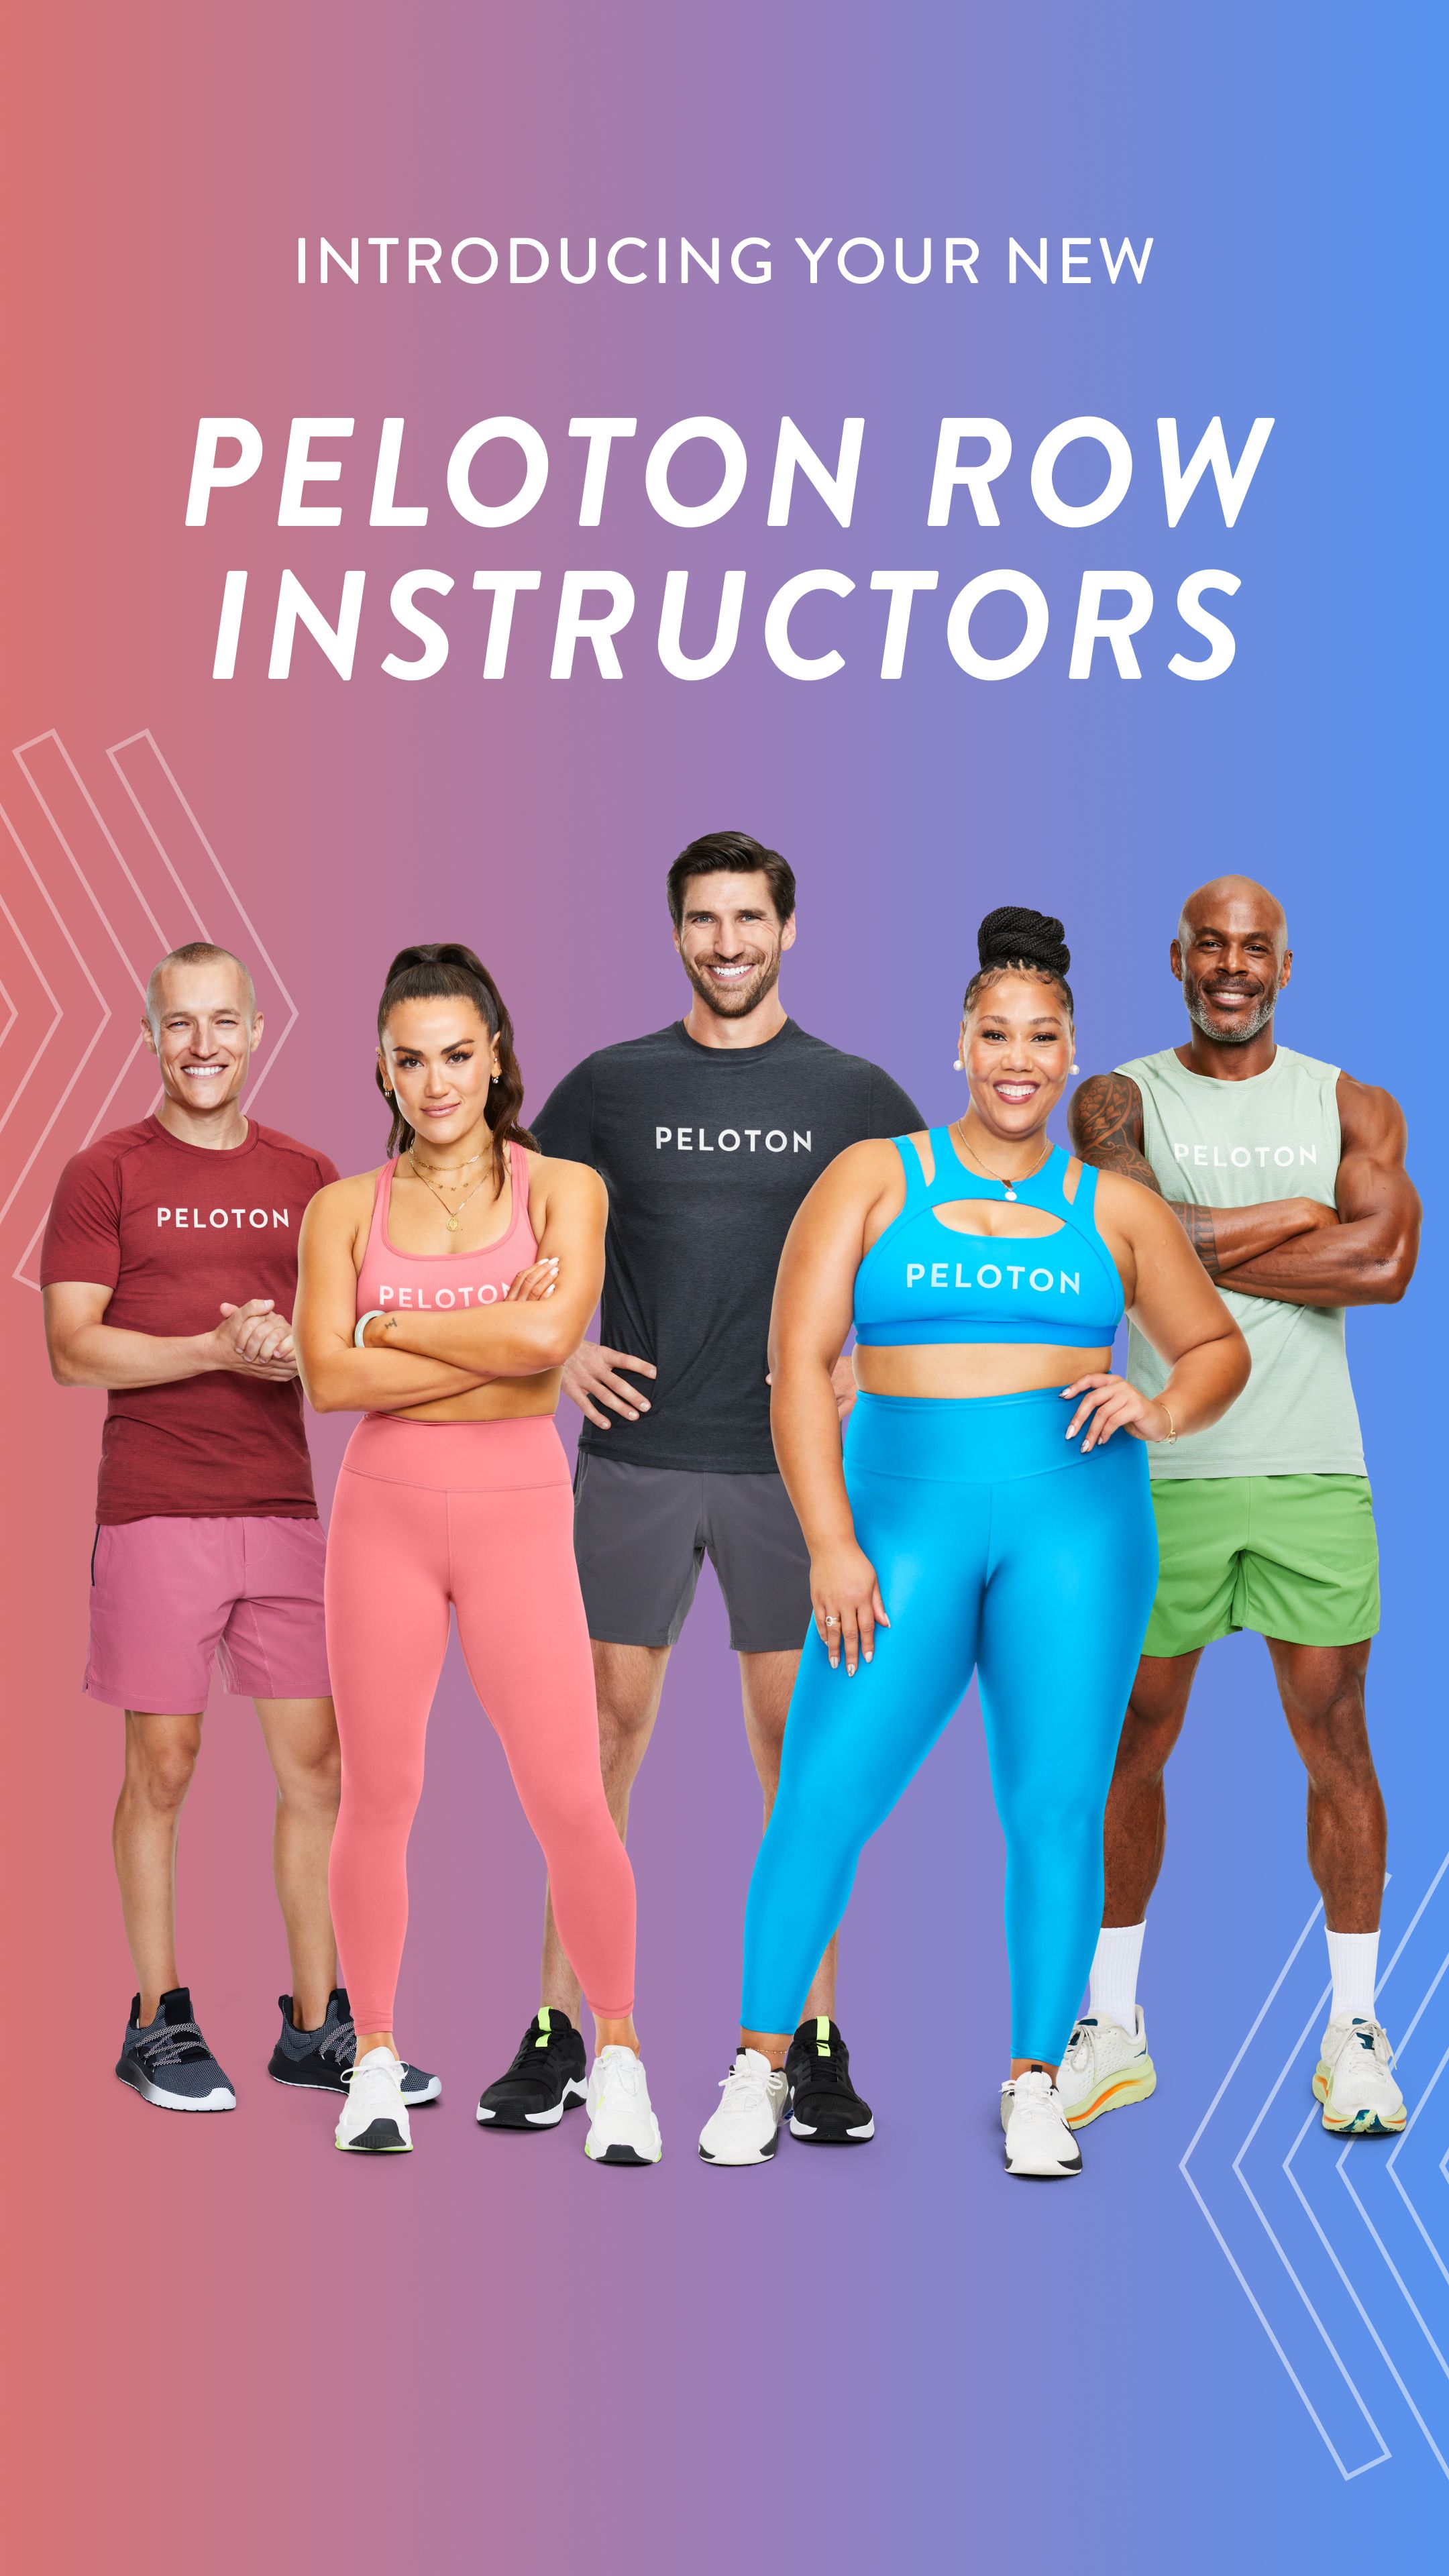 A strong body and mindset: Fitness manager and instructor